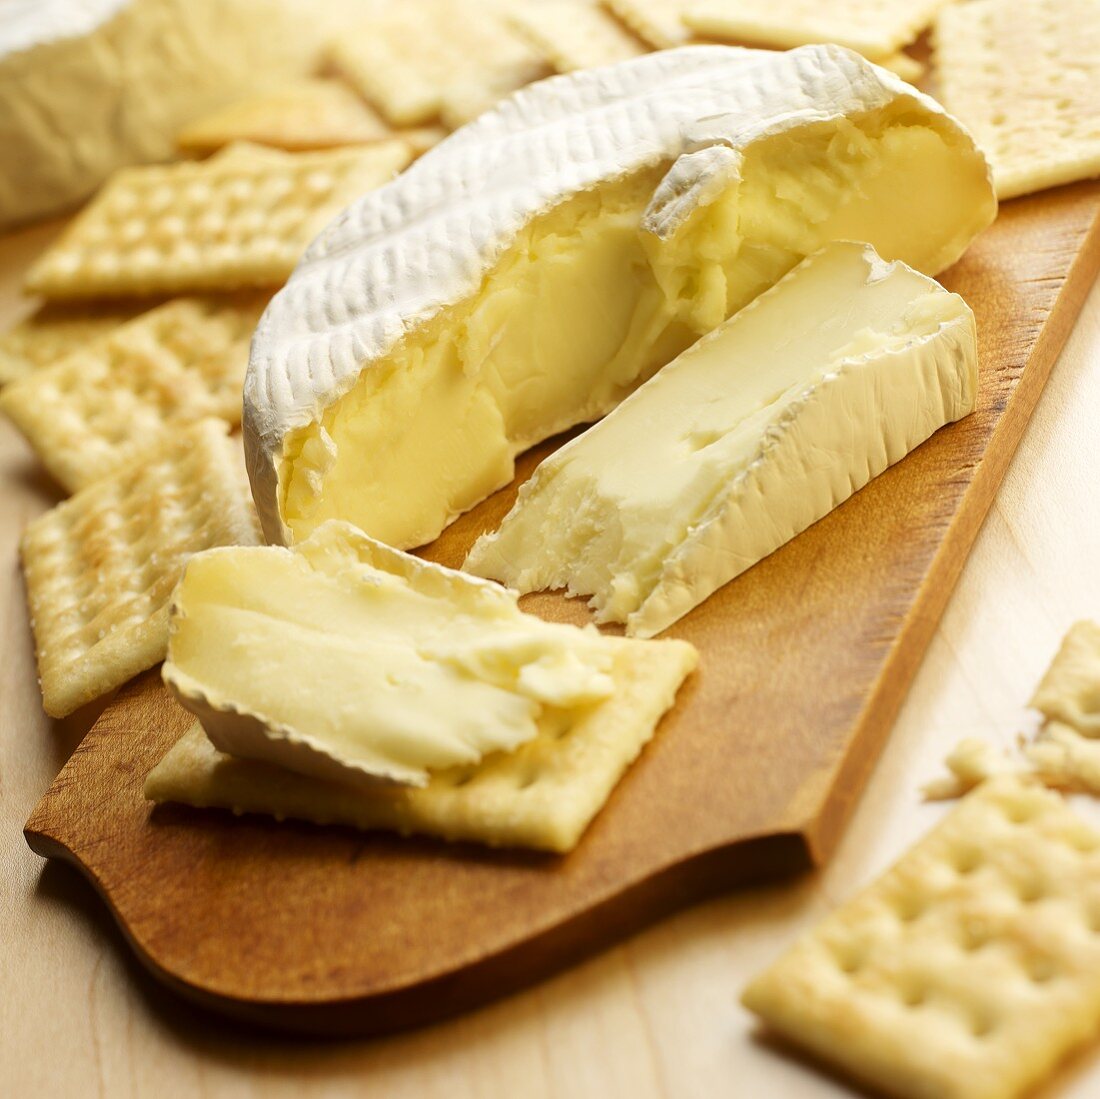 Sliced Brie Cheese with Crackers on Wooden Cheese Board